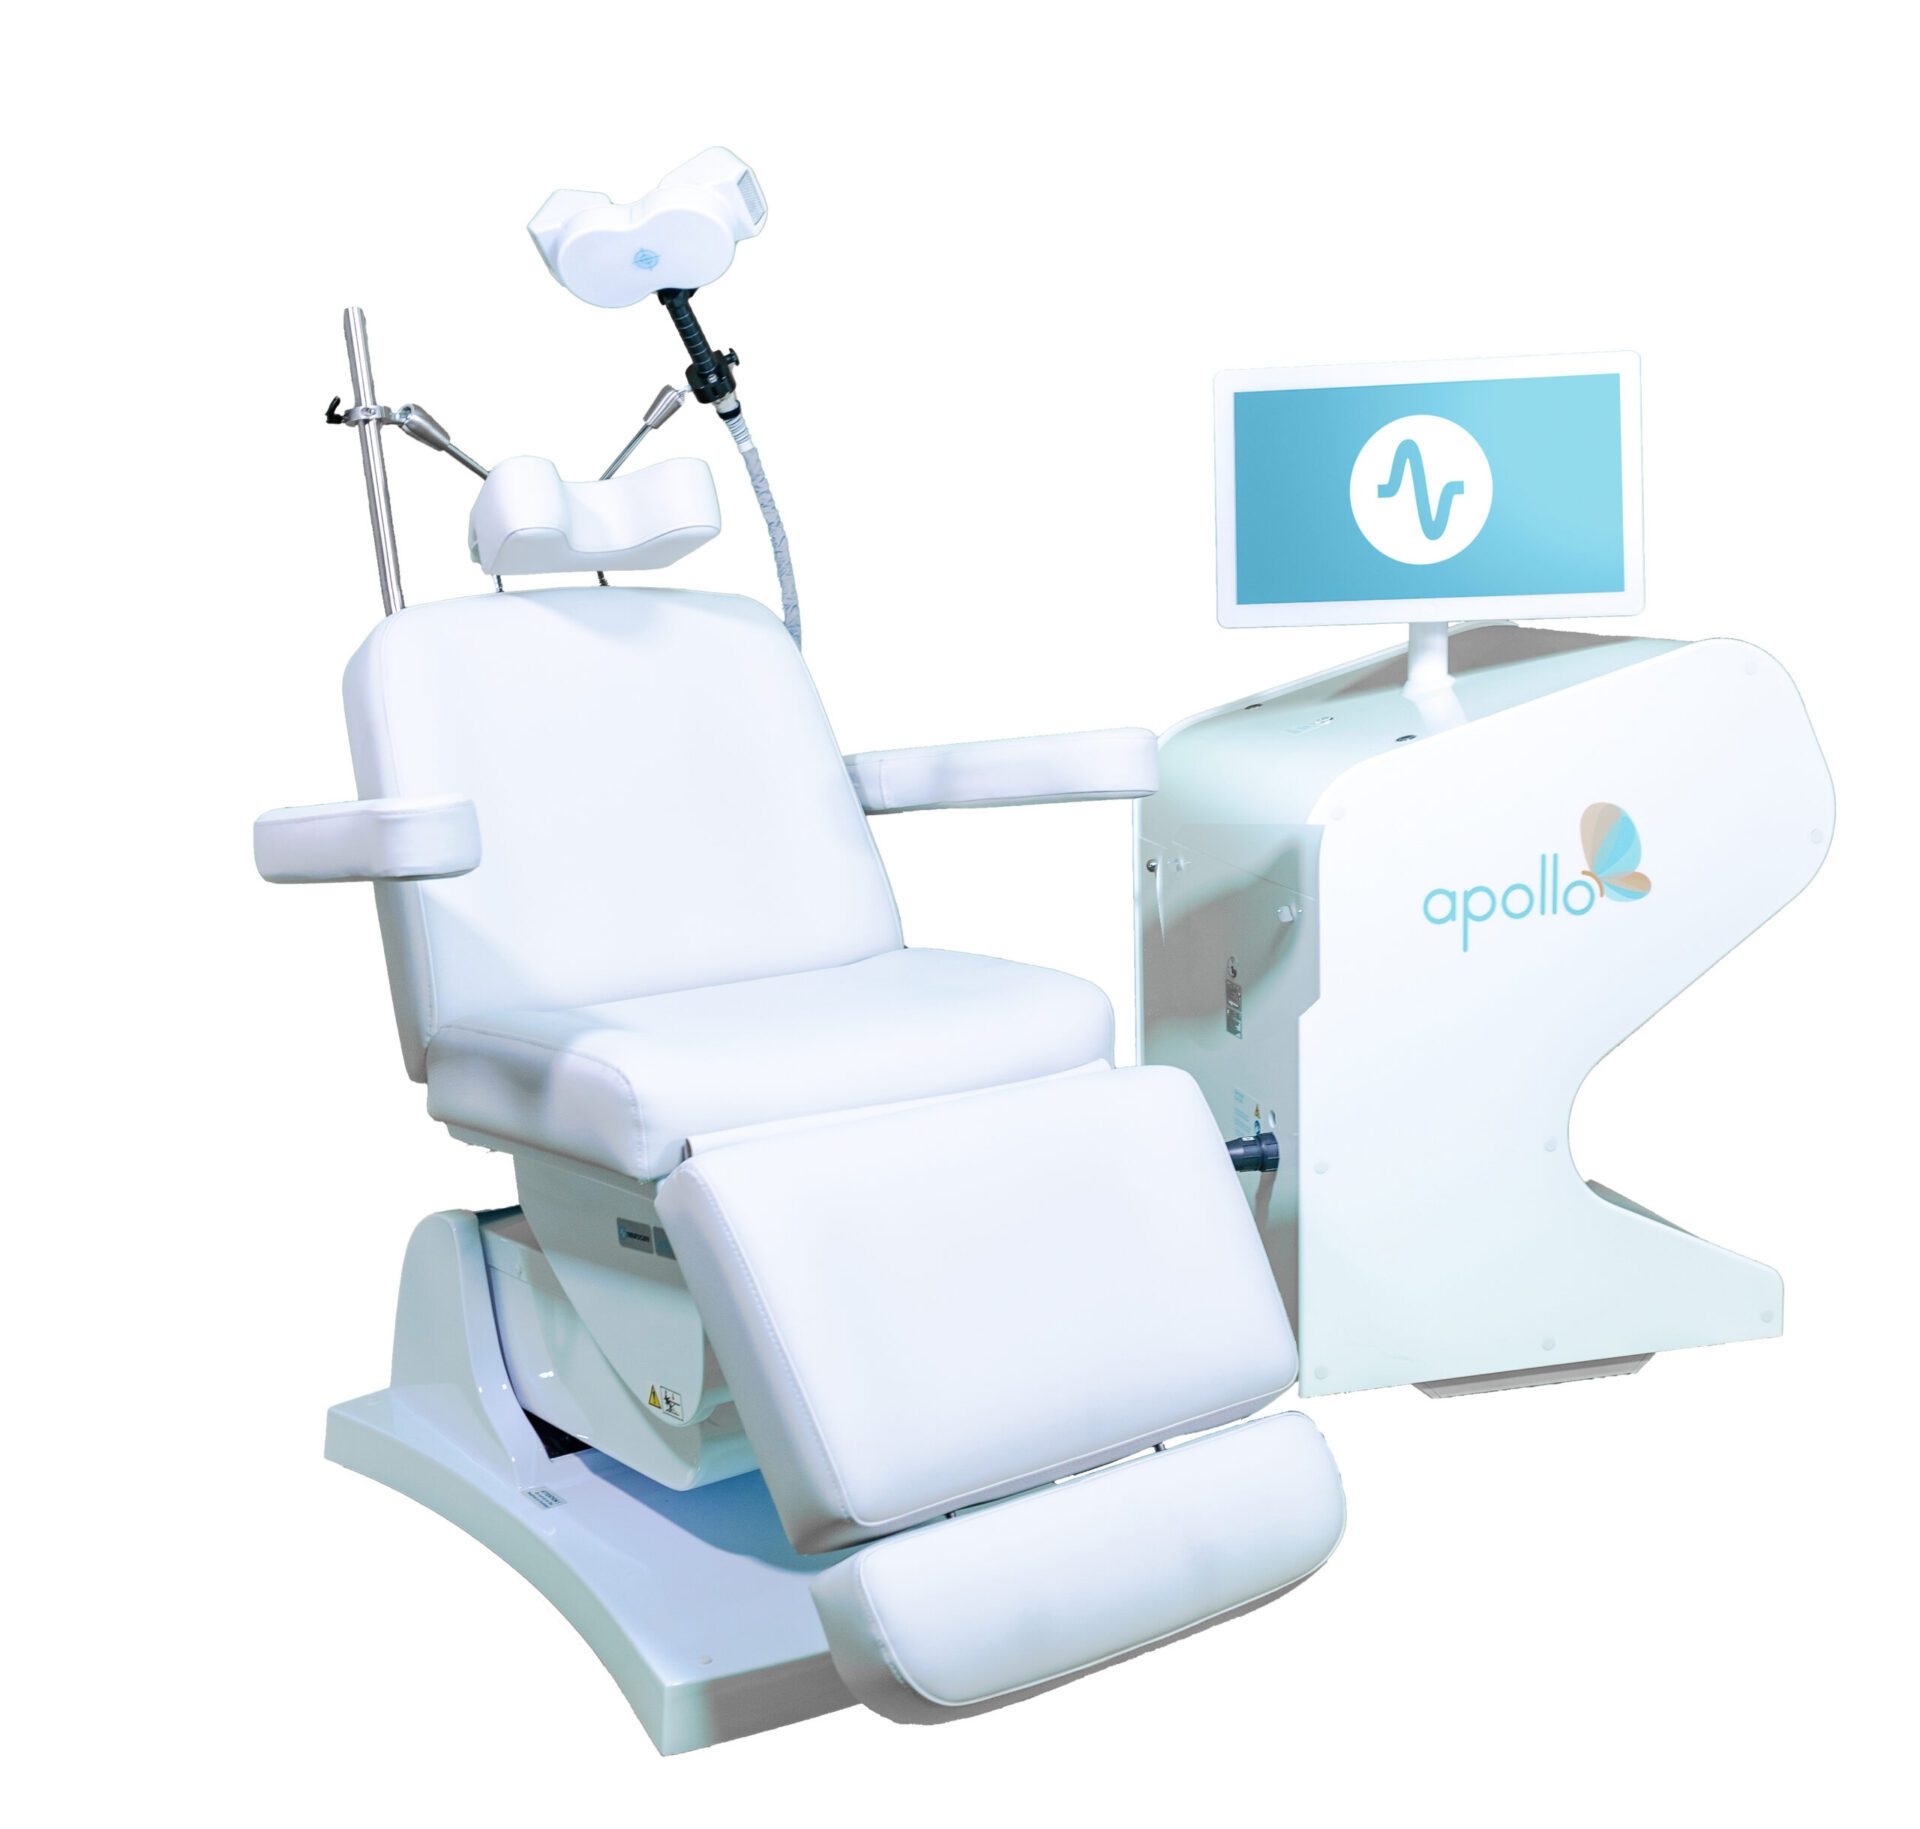 Apollo TMS Therapy, Knoxville Neurocare Therapy